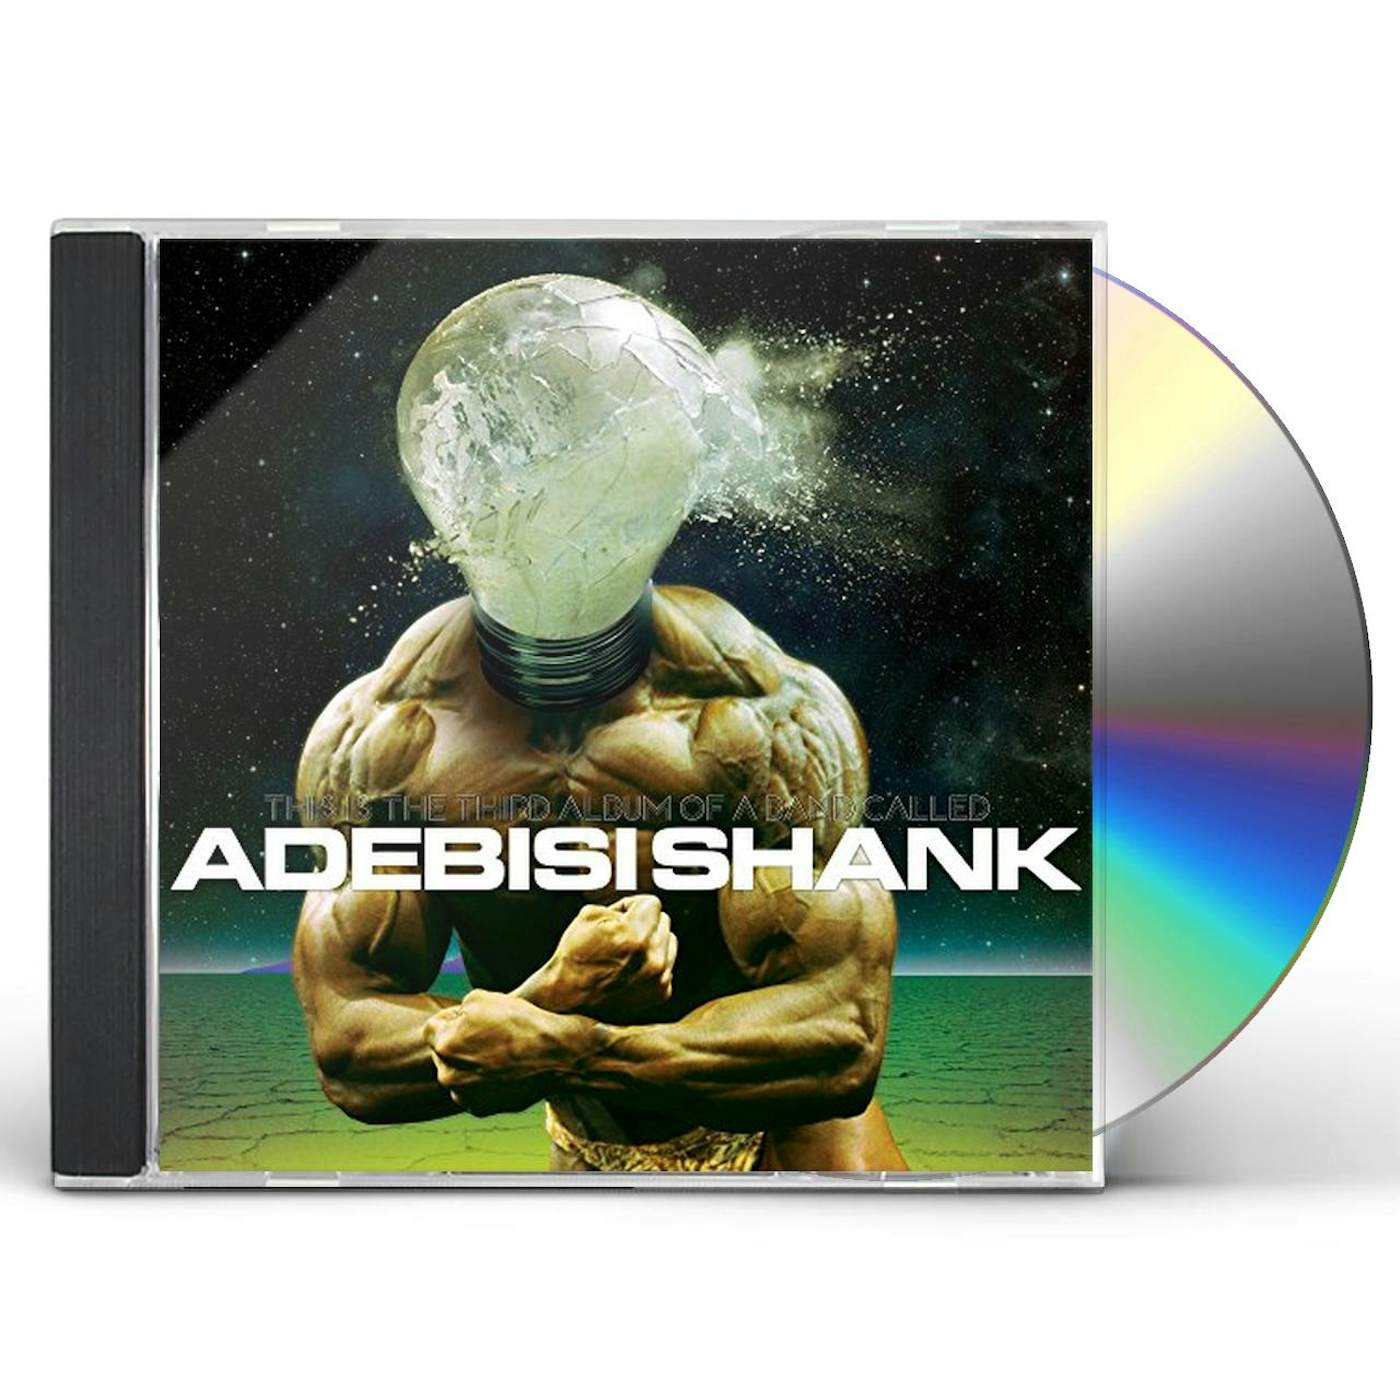 Adebisi Shank THIS IS THE THIRD ALBUM OF A BAND CALLED ADEBISI CD